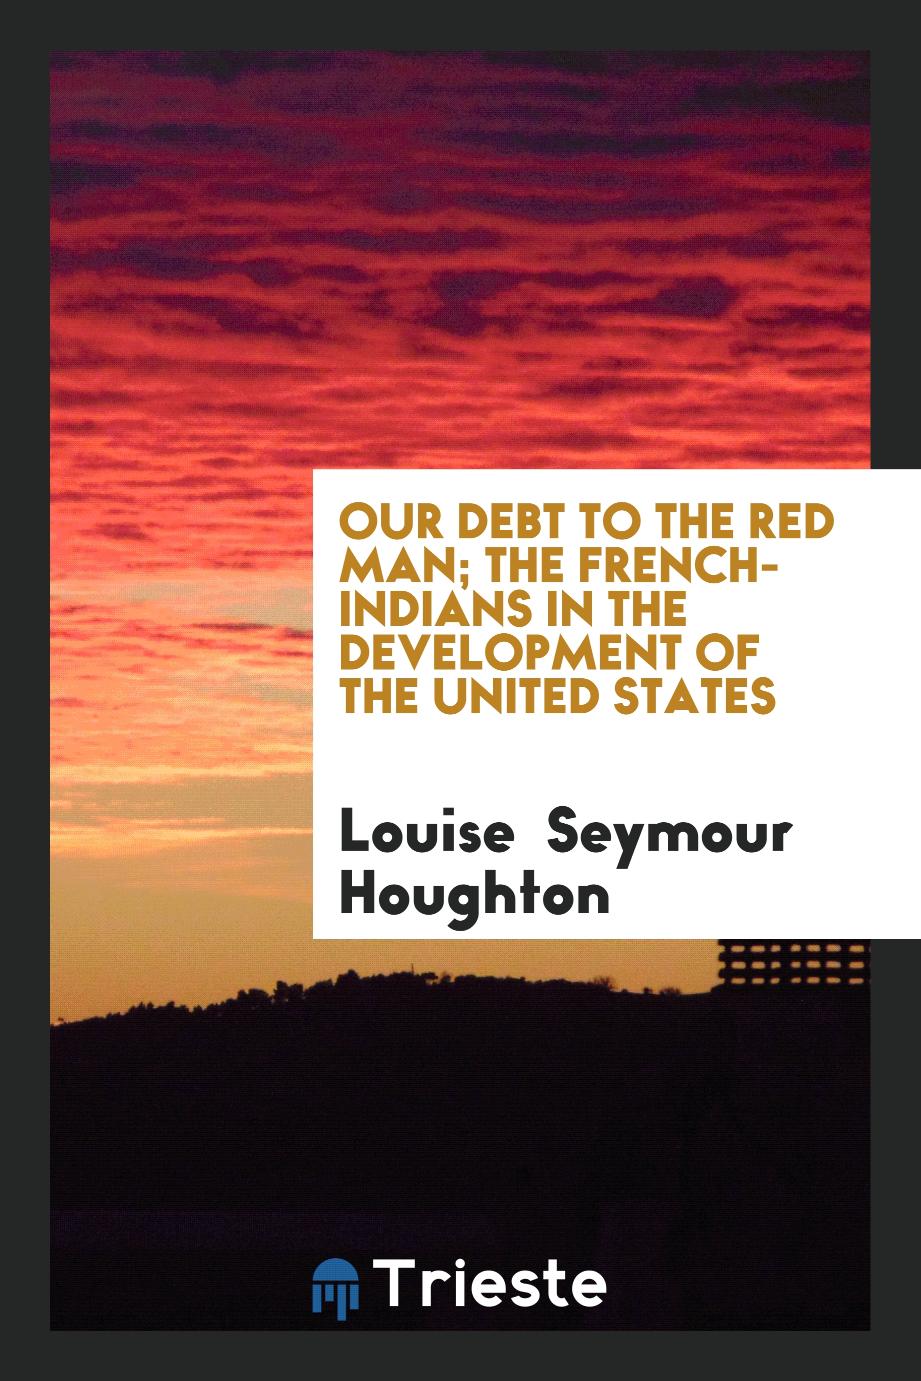 Our debt to the red man; the French-Indians in the development of the United States